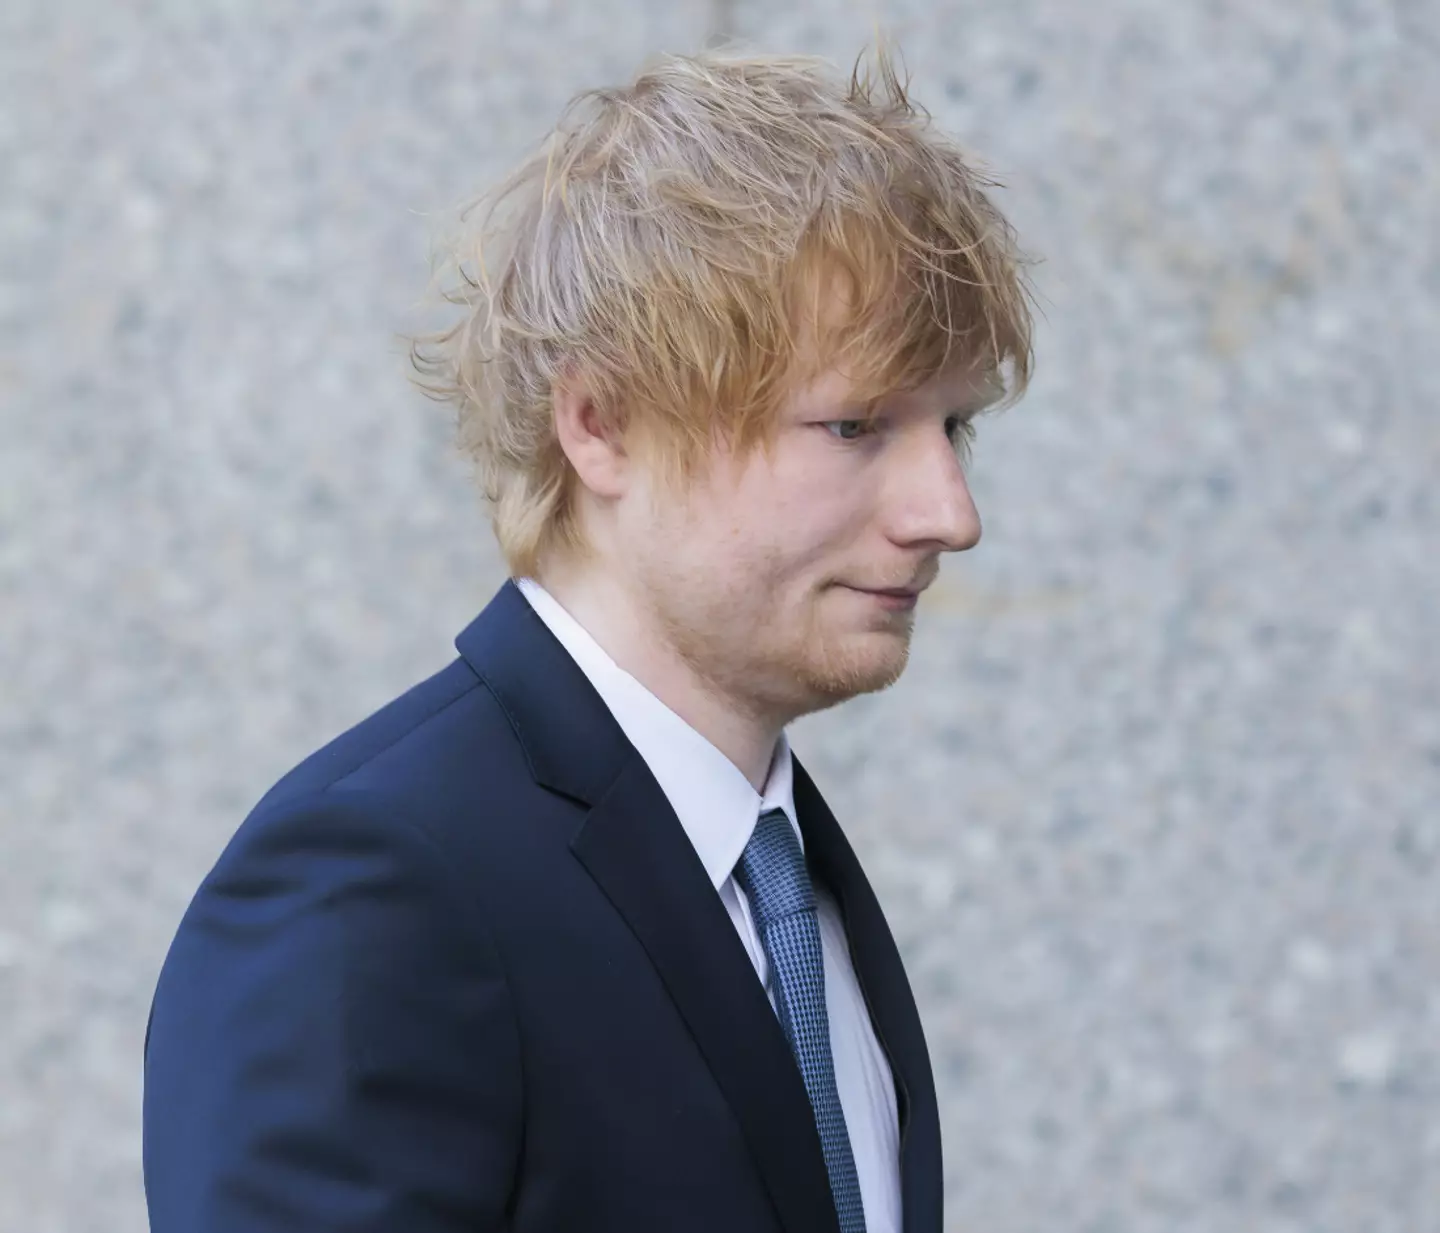 Sheeran took the stand in New York.